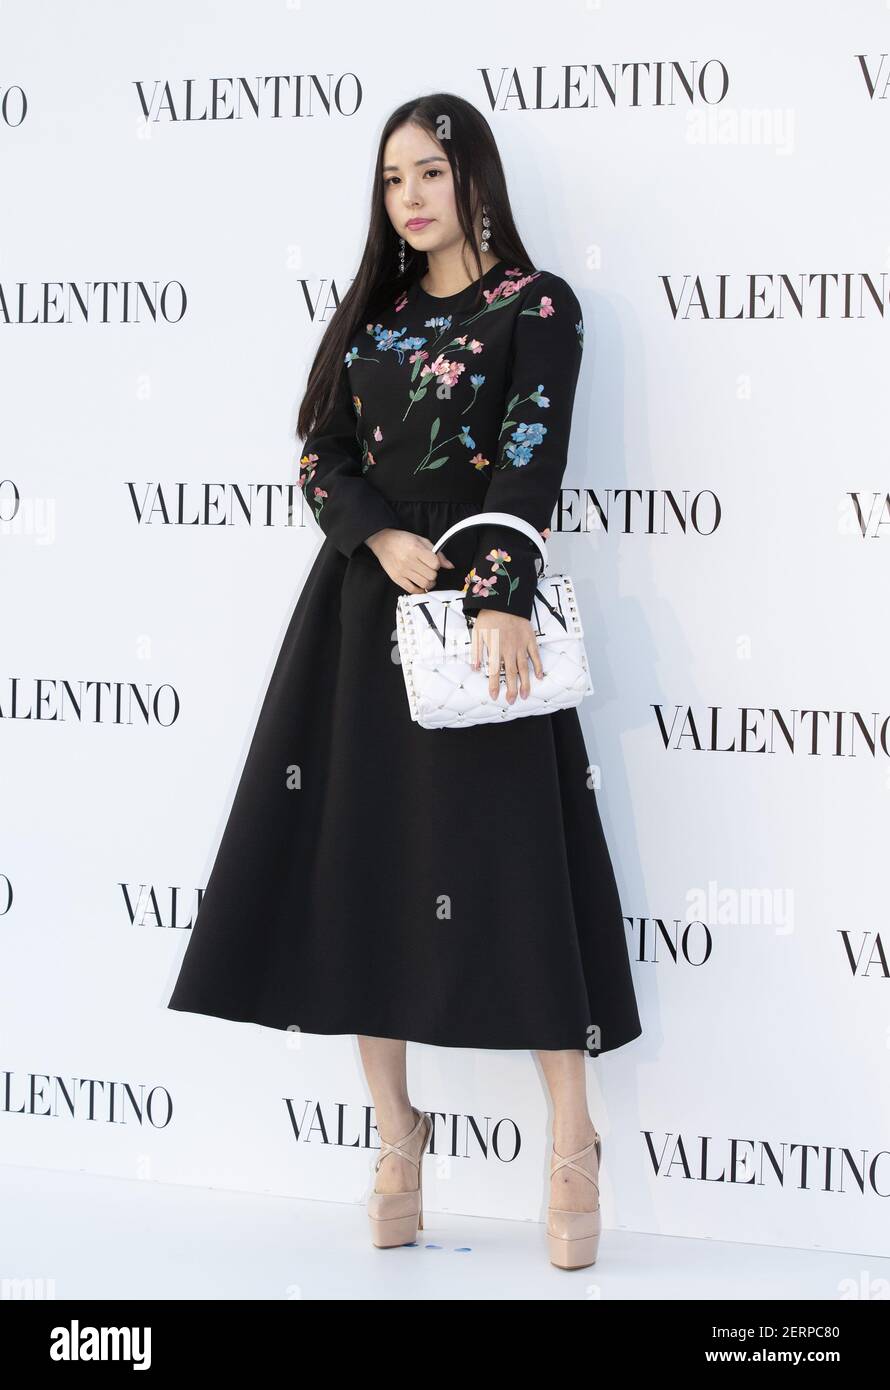 28 September 2018 - Seoul, South Korea : South Korean actress Min Hyo-rin, attends a photo call for the fashion brand Valentino 'Candystud Factory' pop-up store launching photo call at Galleria Department Store in Seoul, South Korea on September 28, 2018. Photo Credit: Lee Young-ho/Sipa USA Stock Photo